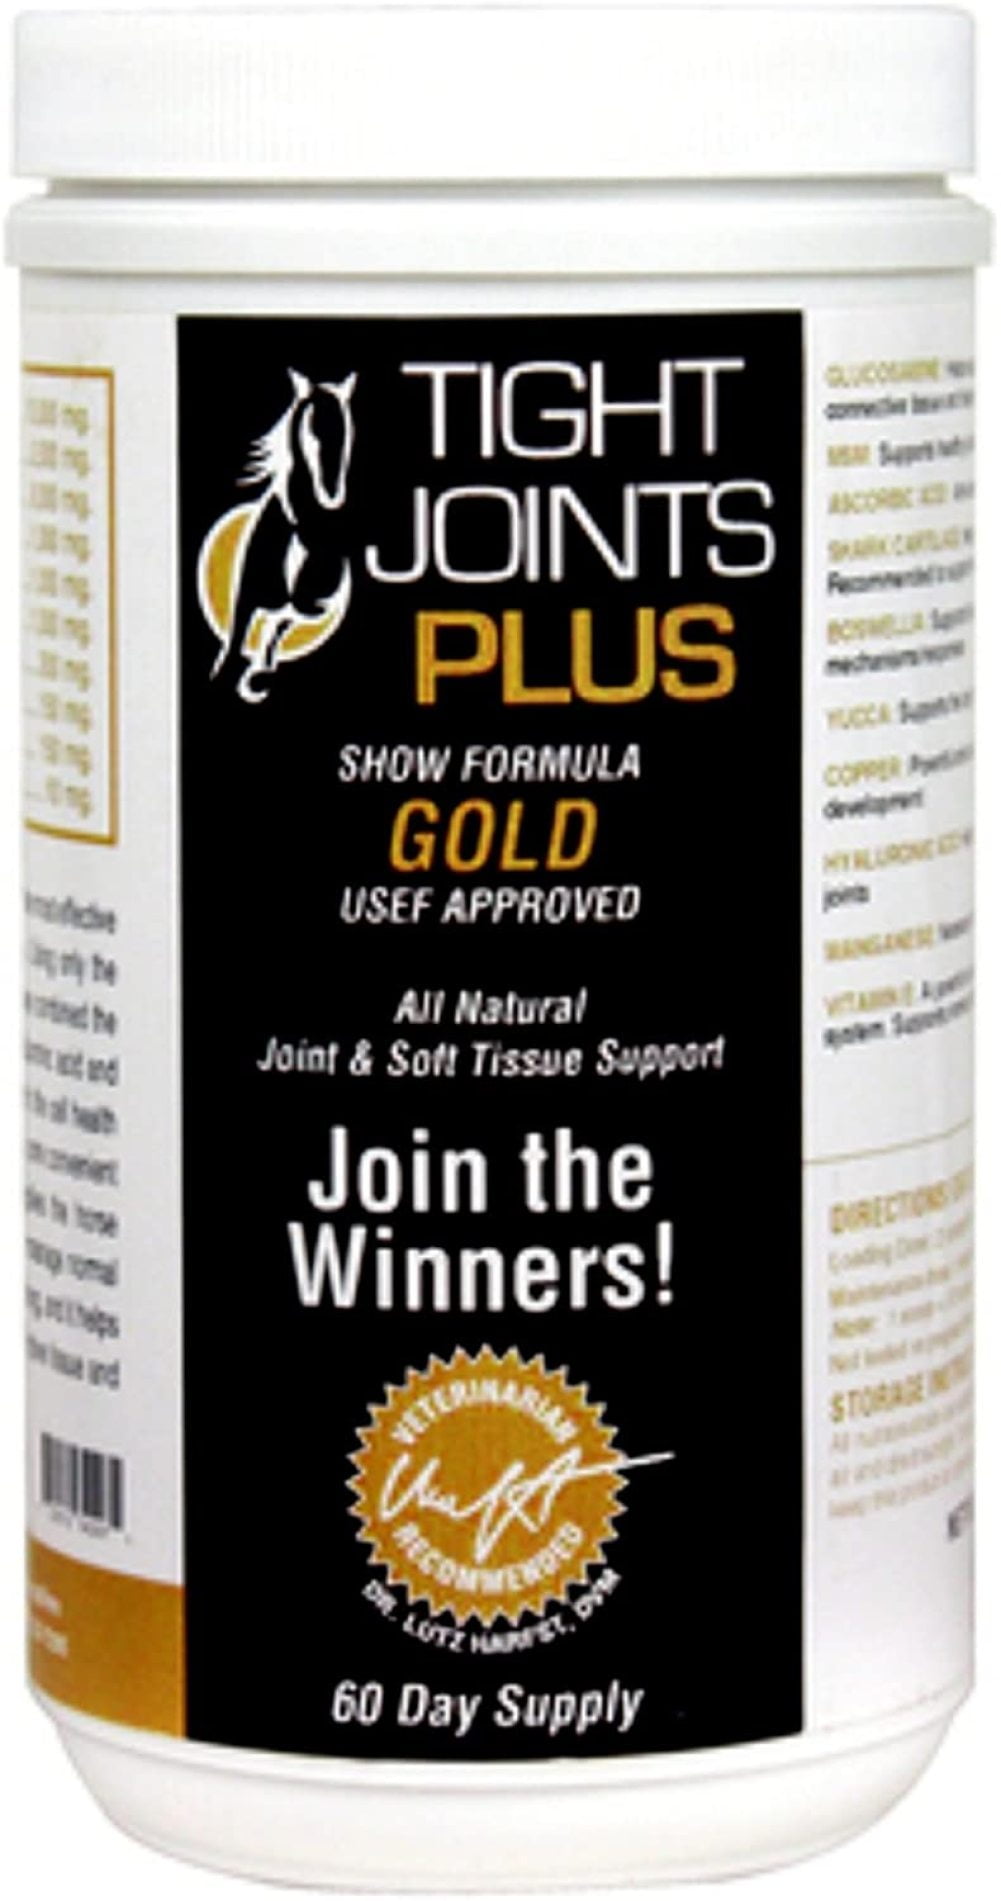 "TaliaPosy GOLD Show Formula for Horses. Glucosamine, Hyaluronic Acid and Chondroitin Sulfate to Support Structural Integrity and Mobility of Joints and Connective Tissue. USEF-Approved. Lbs."